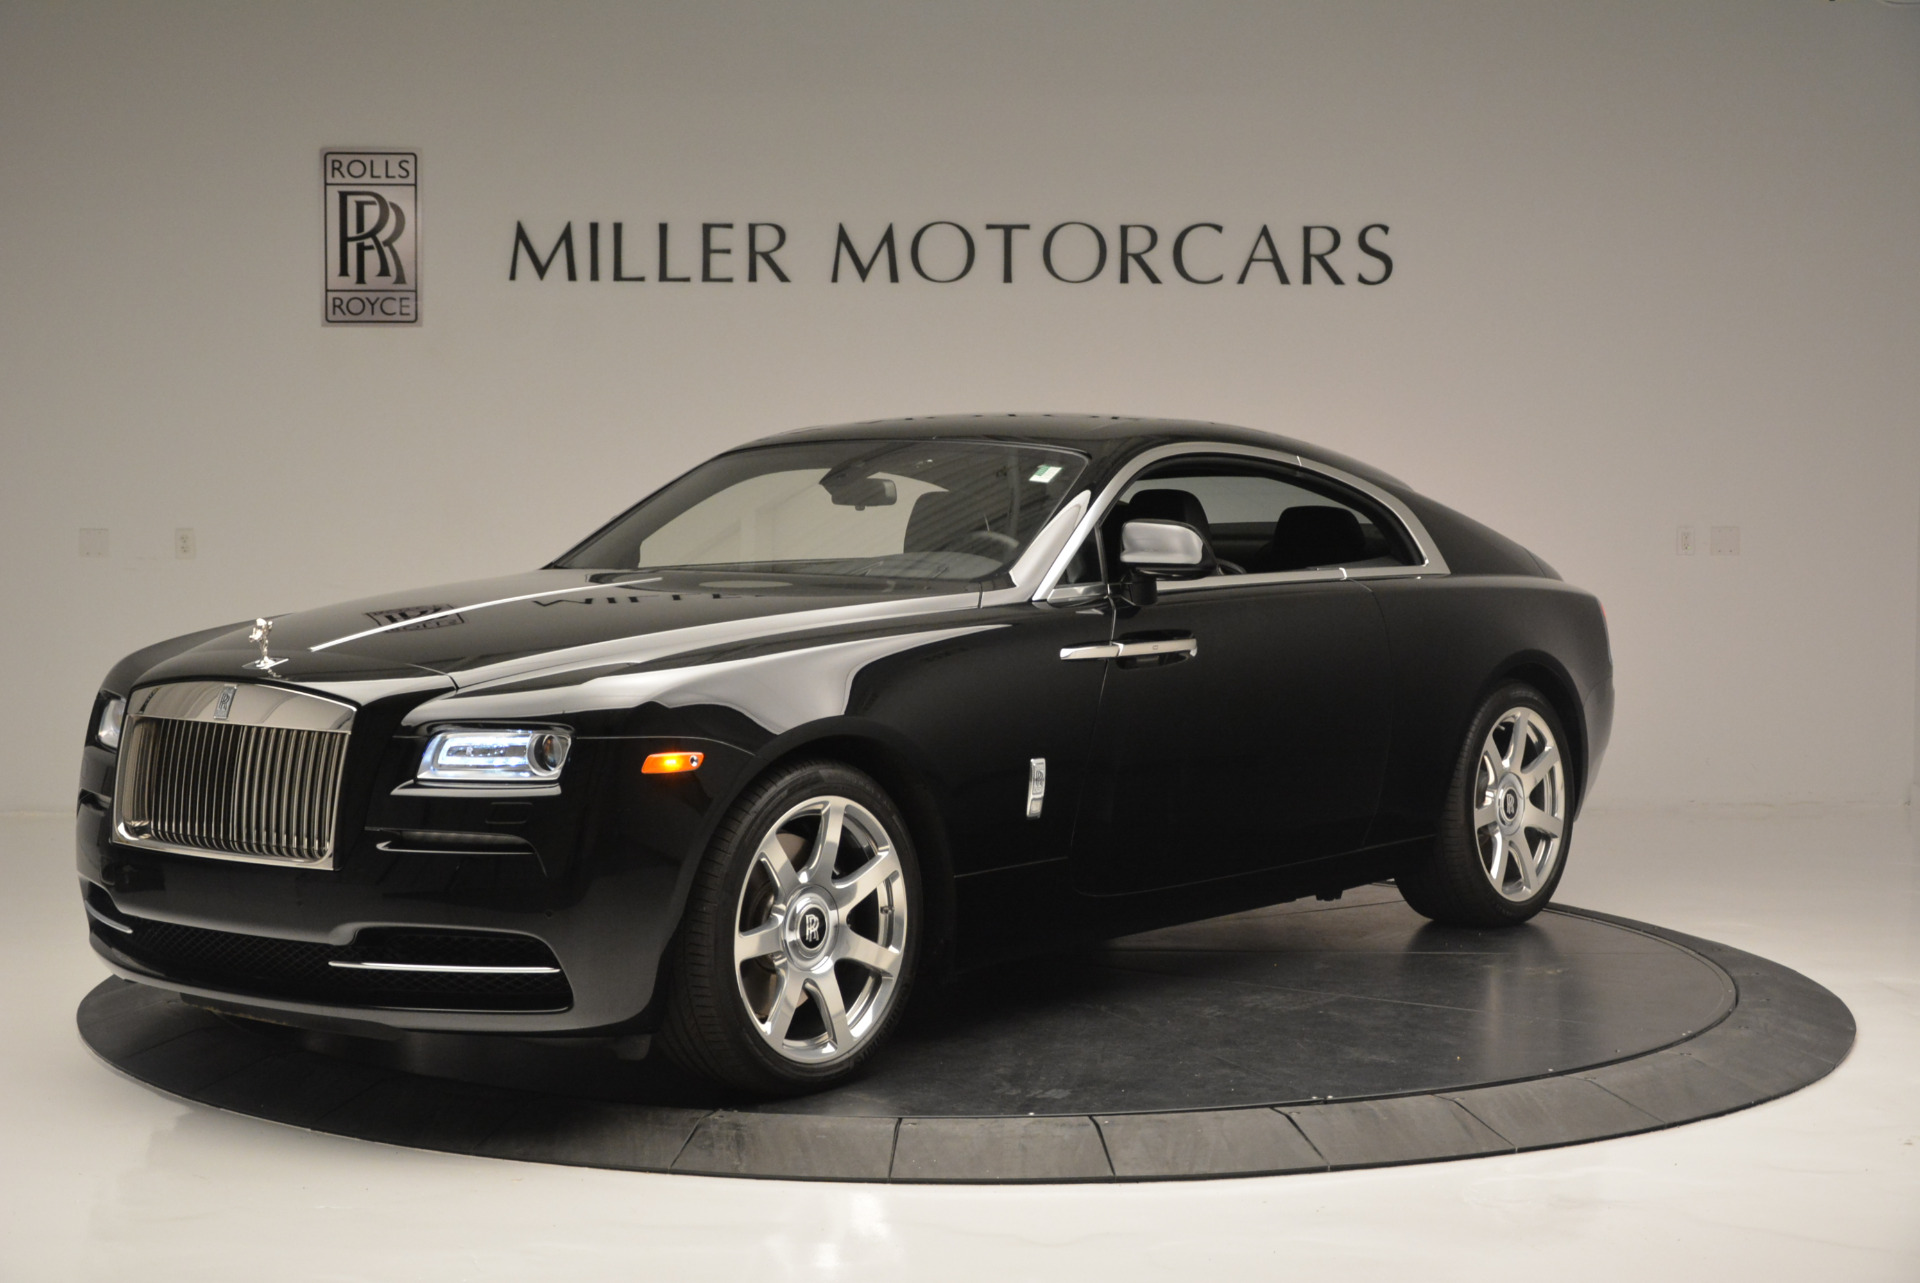 Used 2015 Rolls-Royce Wraith for sale Sold at Pagani of Greenwich in Greenwich CT 06830 1